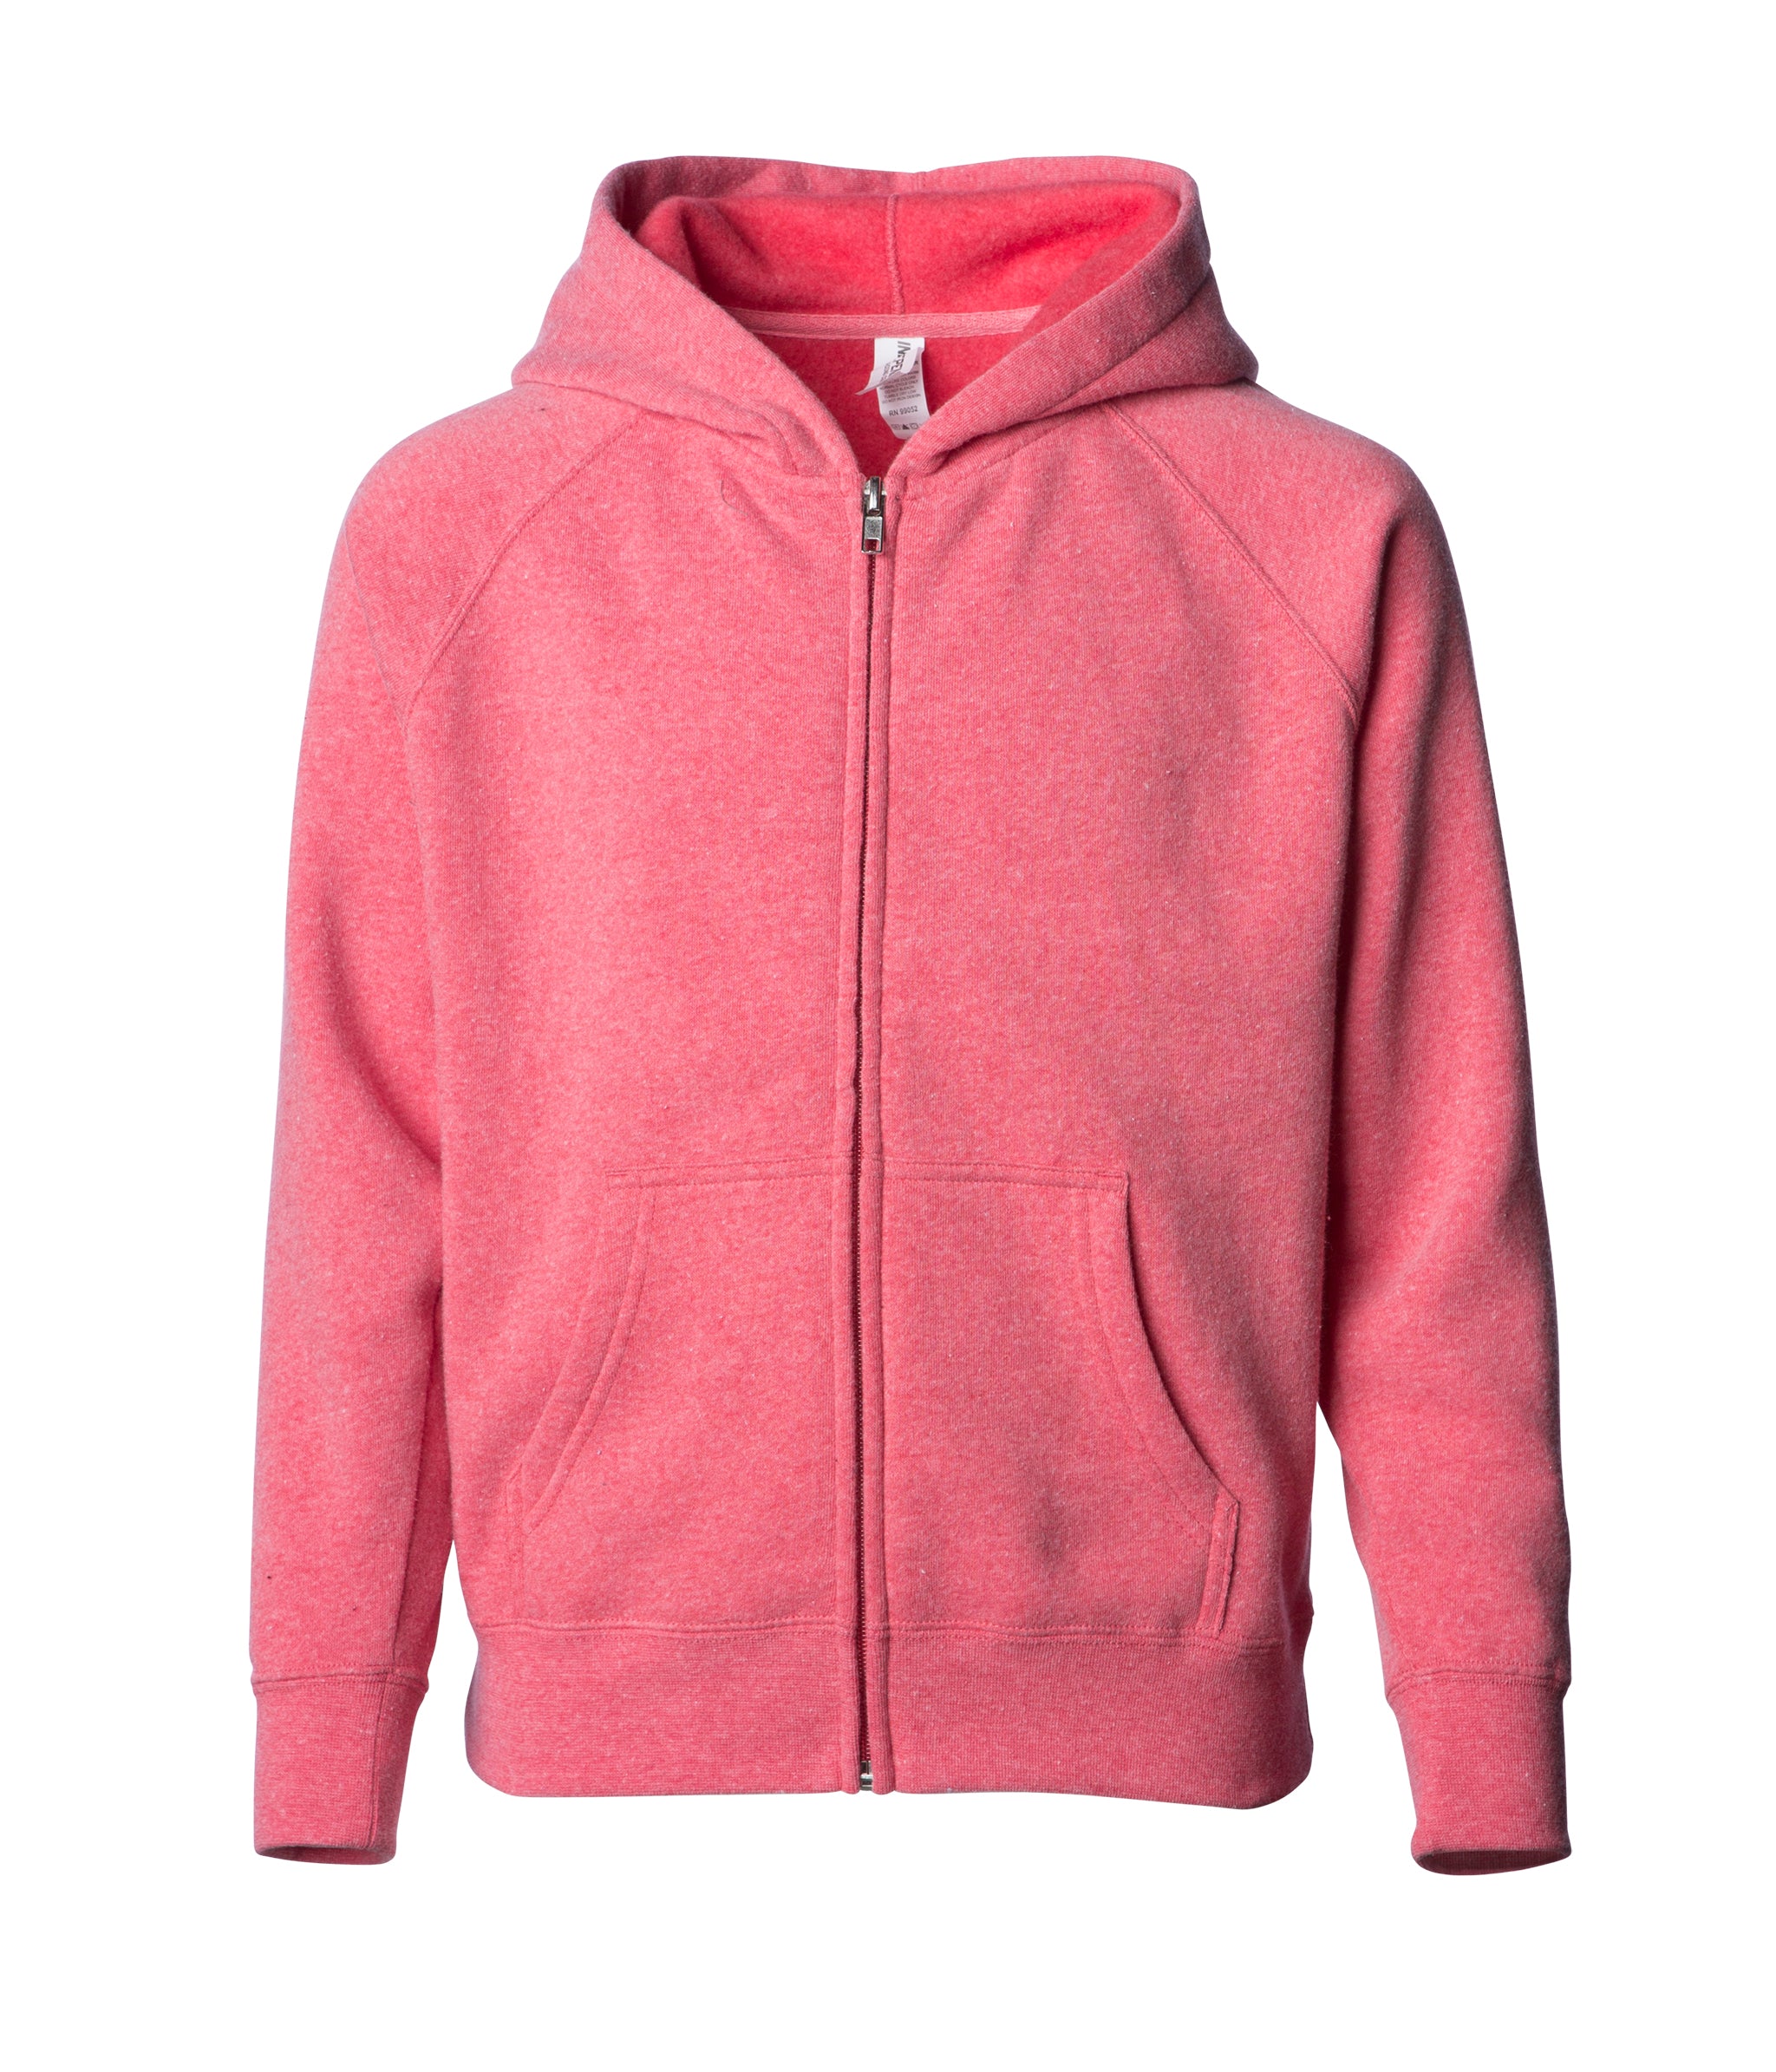 Youth Special Blend Raglan Zip Hoodie | Independent Trading Company